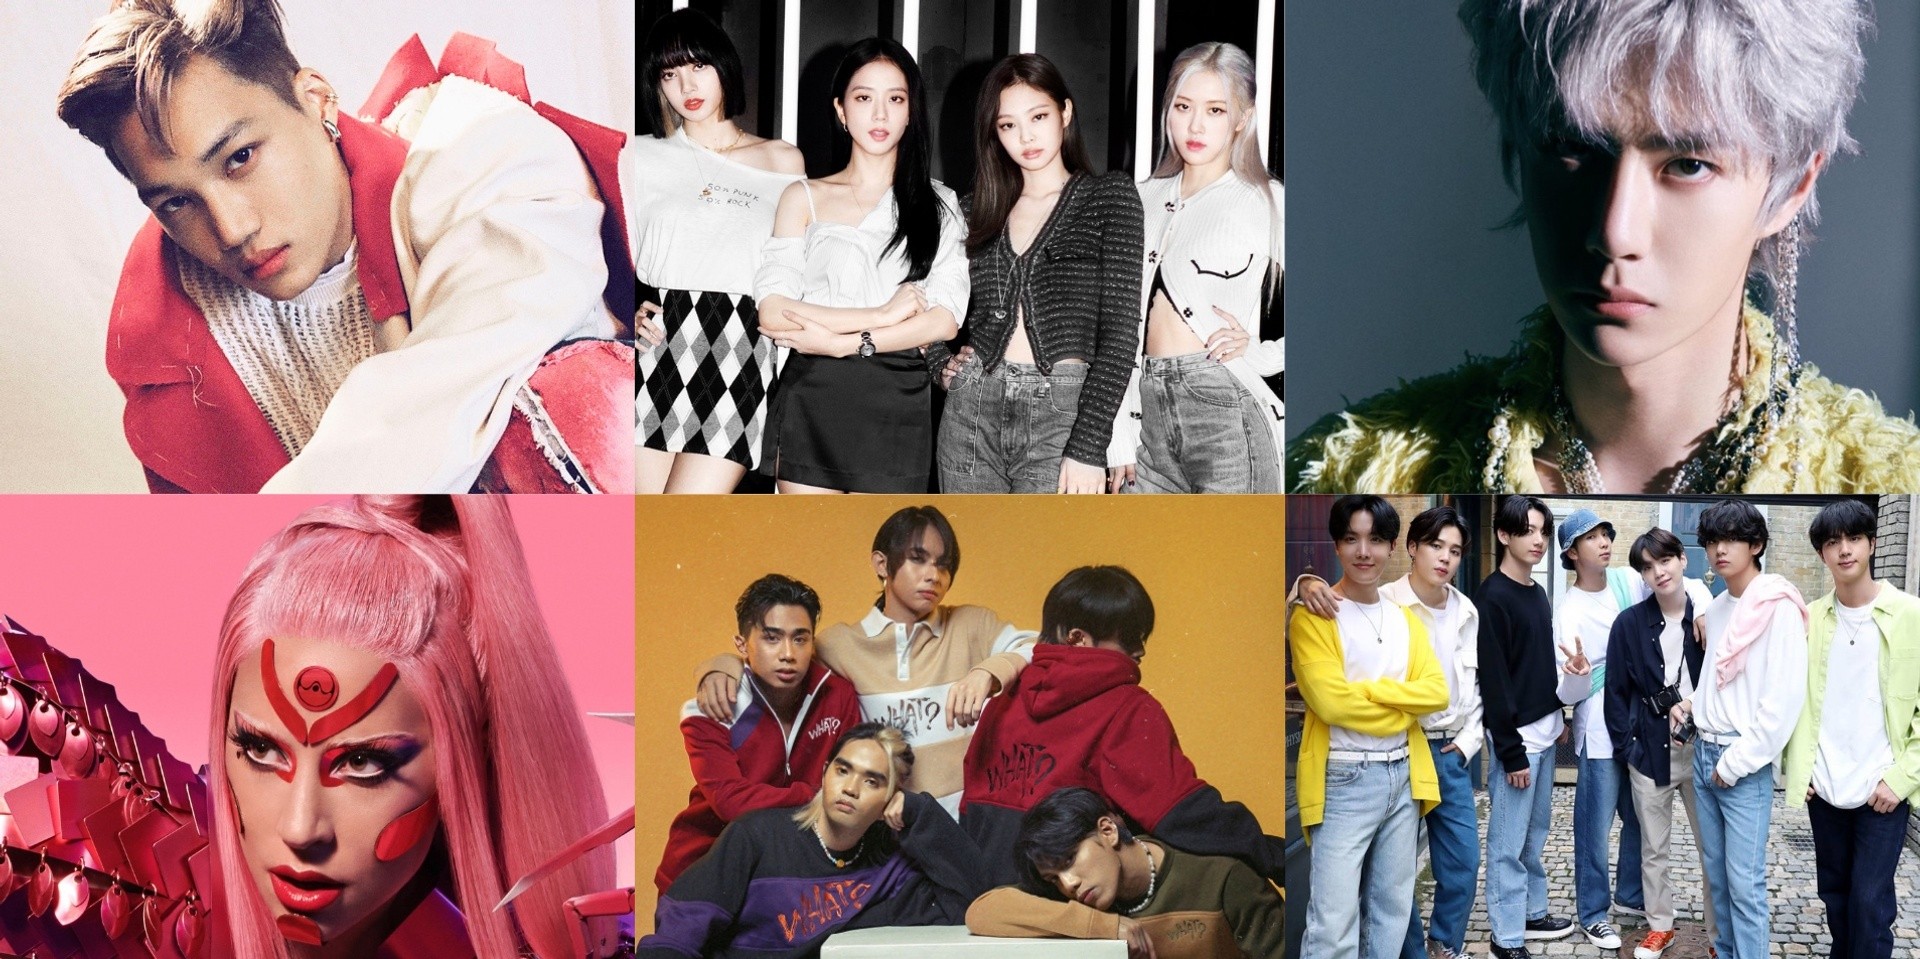 14 collaborative creations between artists and brands — featuring merchandise and collections from BTS, BLACKPINK, EXO's Kai, SB19, Wang Yibo, and more